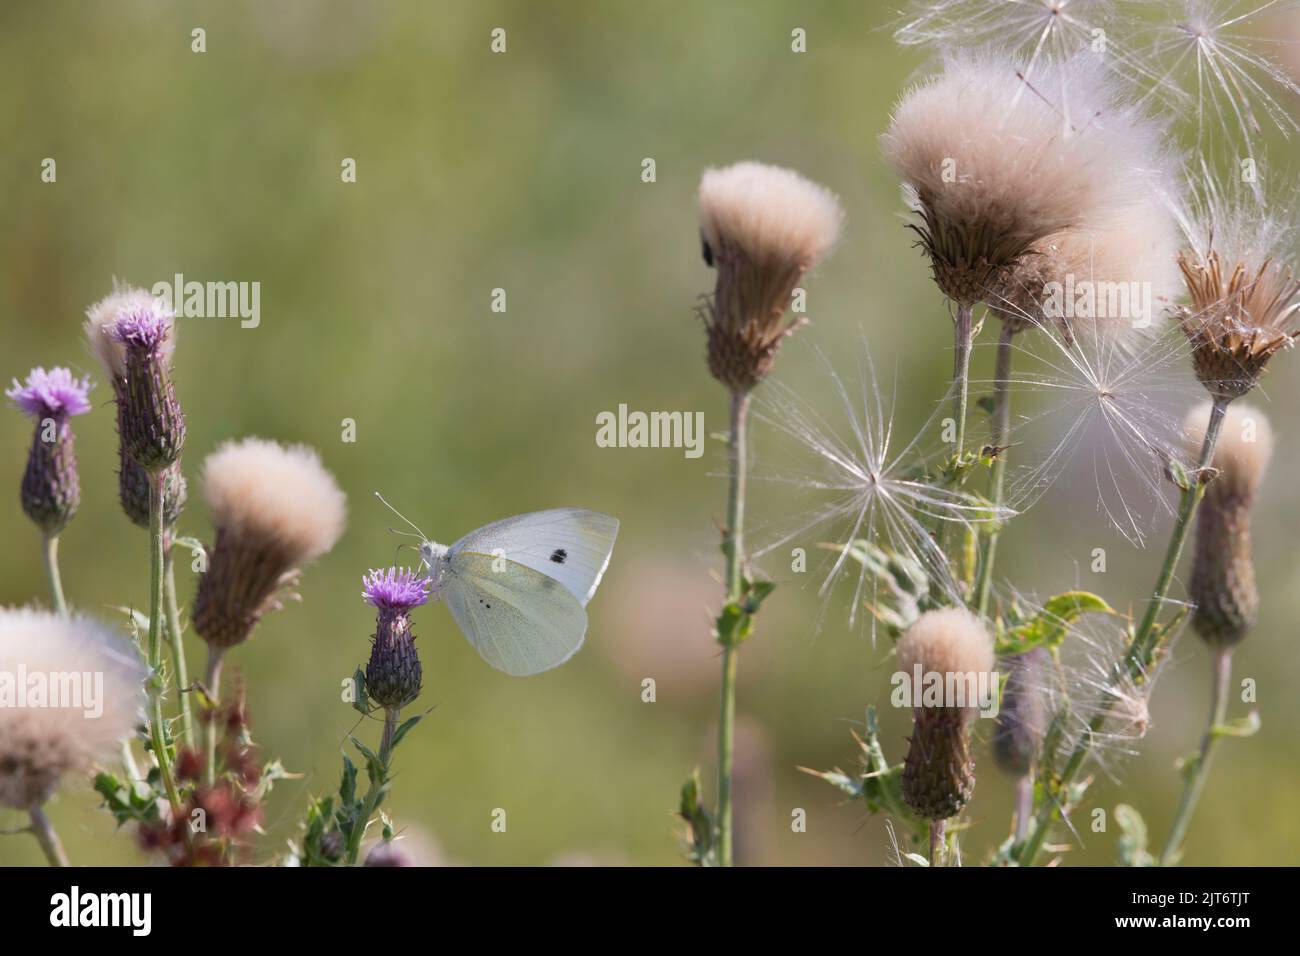 A Large White Butterfly (Pieris Brassicae) Foraging on a Thistle Flower Amongst the Seed & Seedheads of Creeping Thistle (Cirsium Arvense) Stock Photo